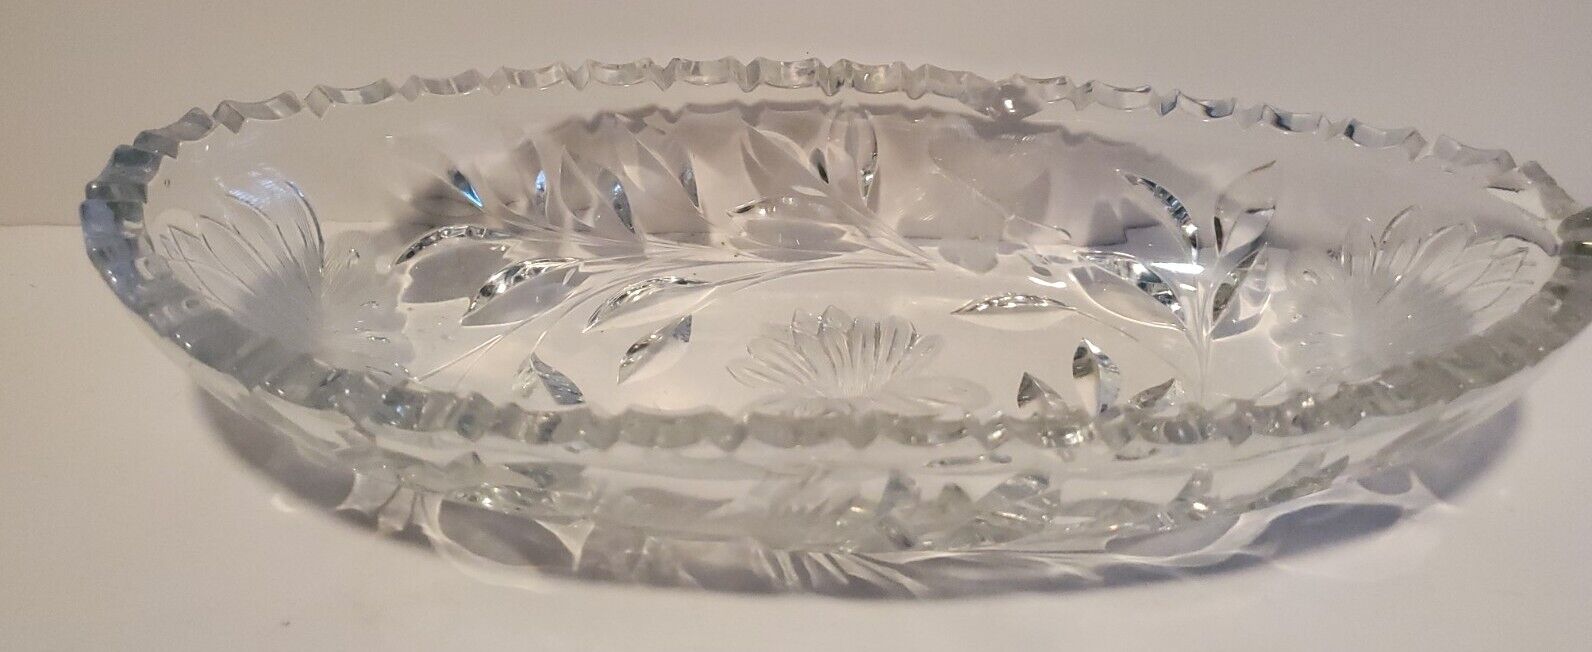 Antique/Vintage Etched/Cut Glass Dish, Floral, Bird, Butterfly 11\